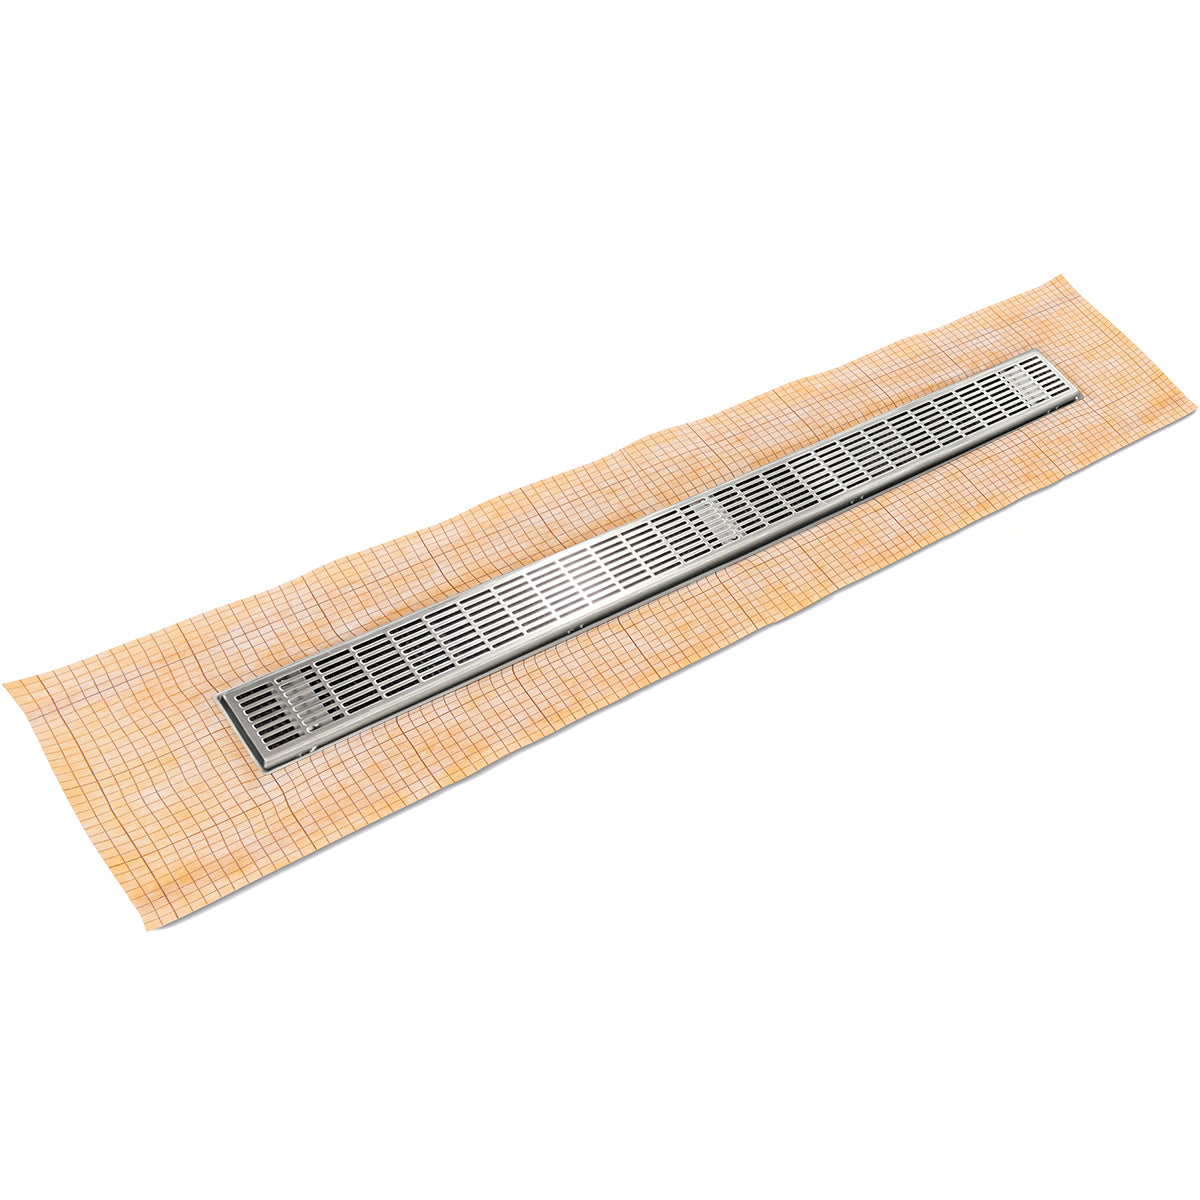 Infinity Drain 32" FCS Series Schluter-Kerdi - Fixed Flange Linear Drain Kit with 2 1/2" Perforated Slotted Grate